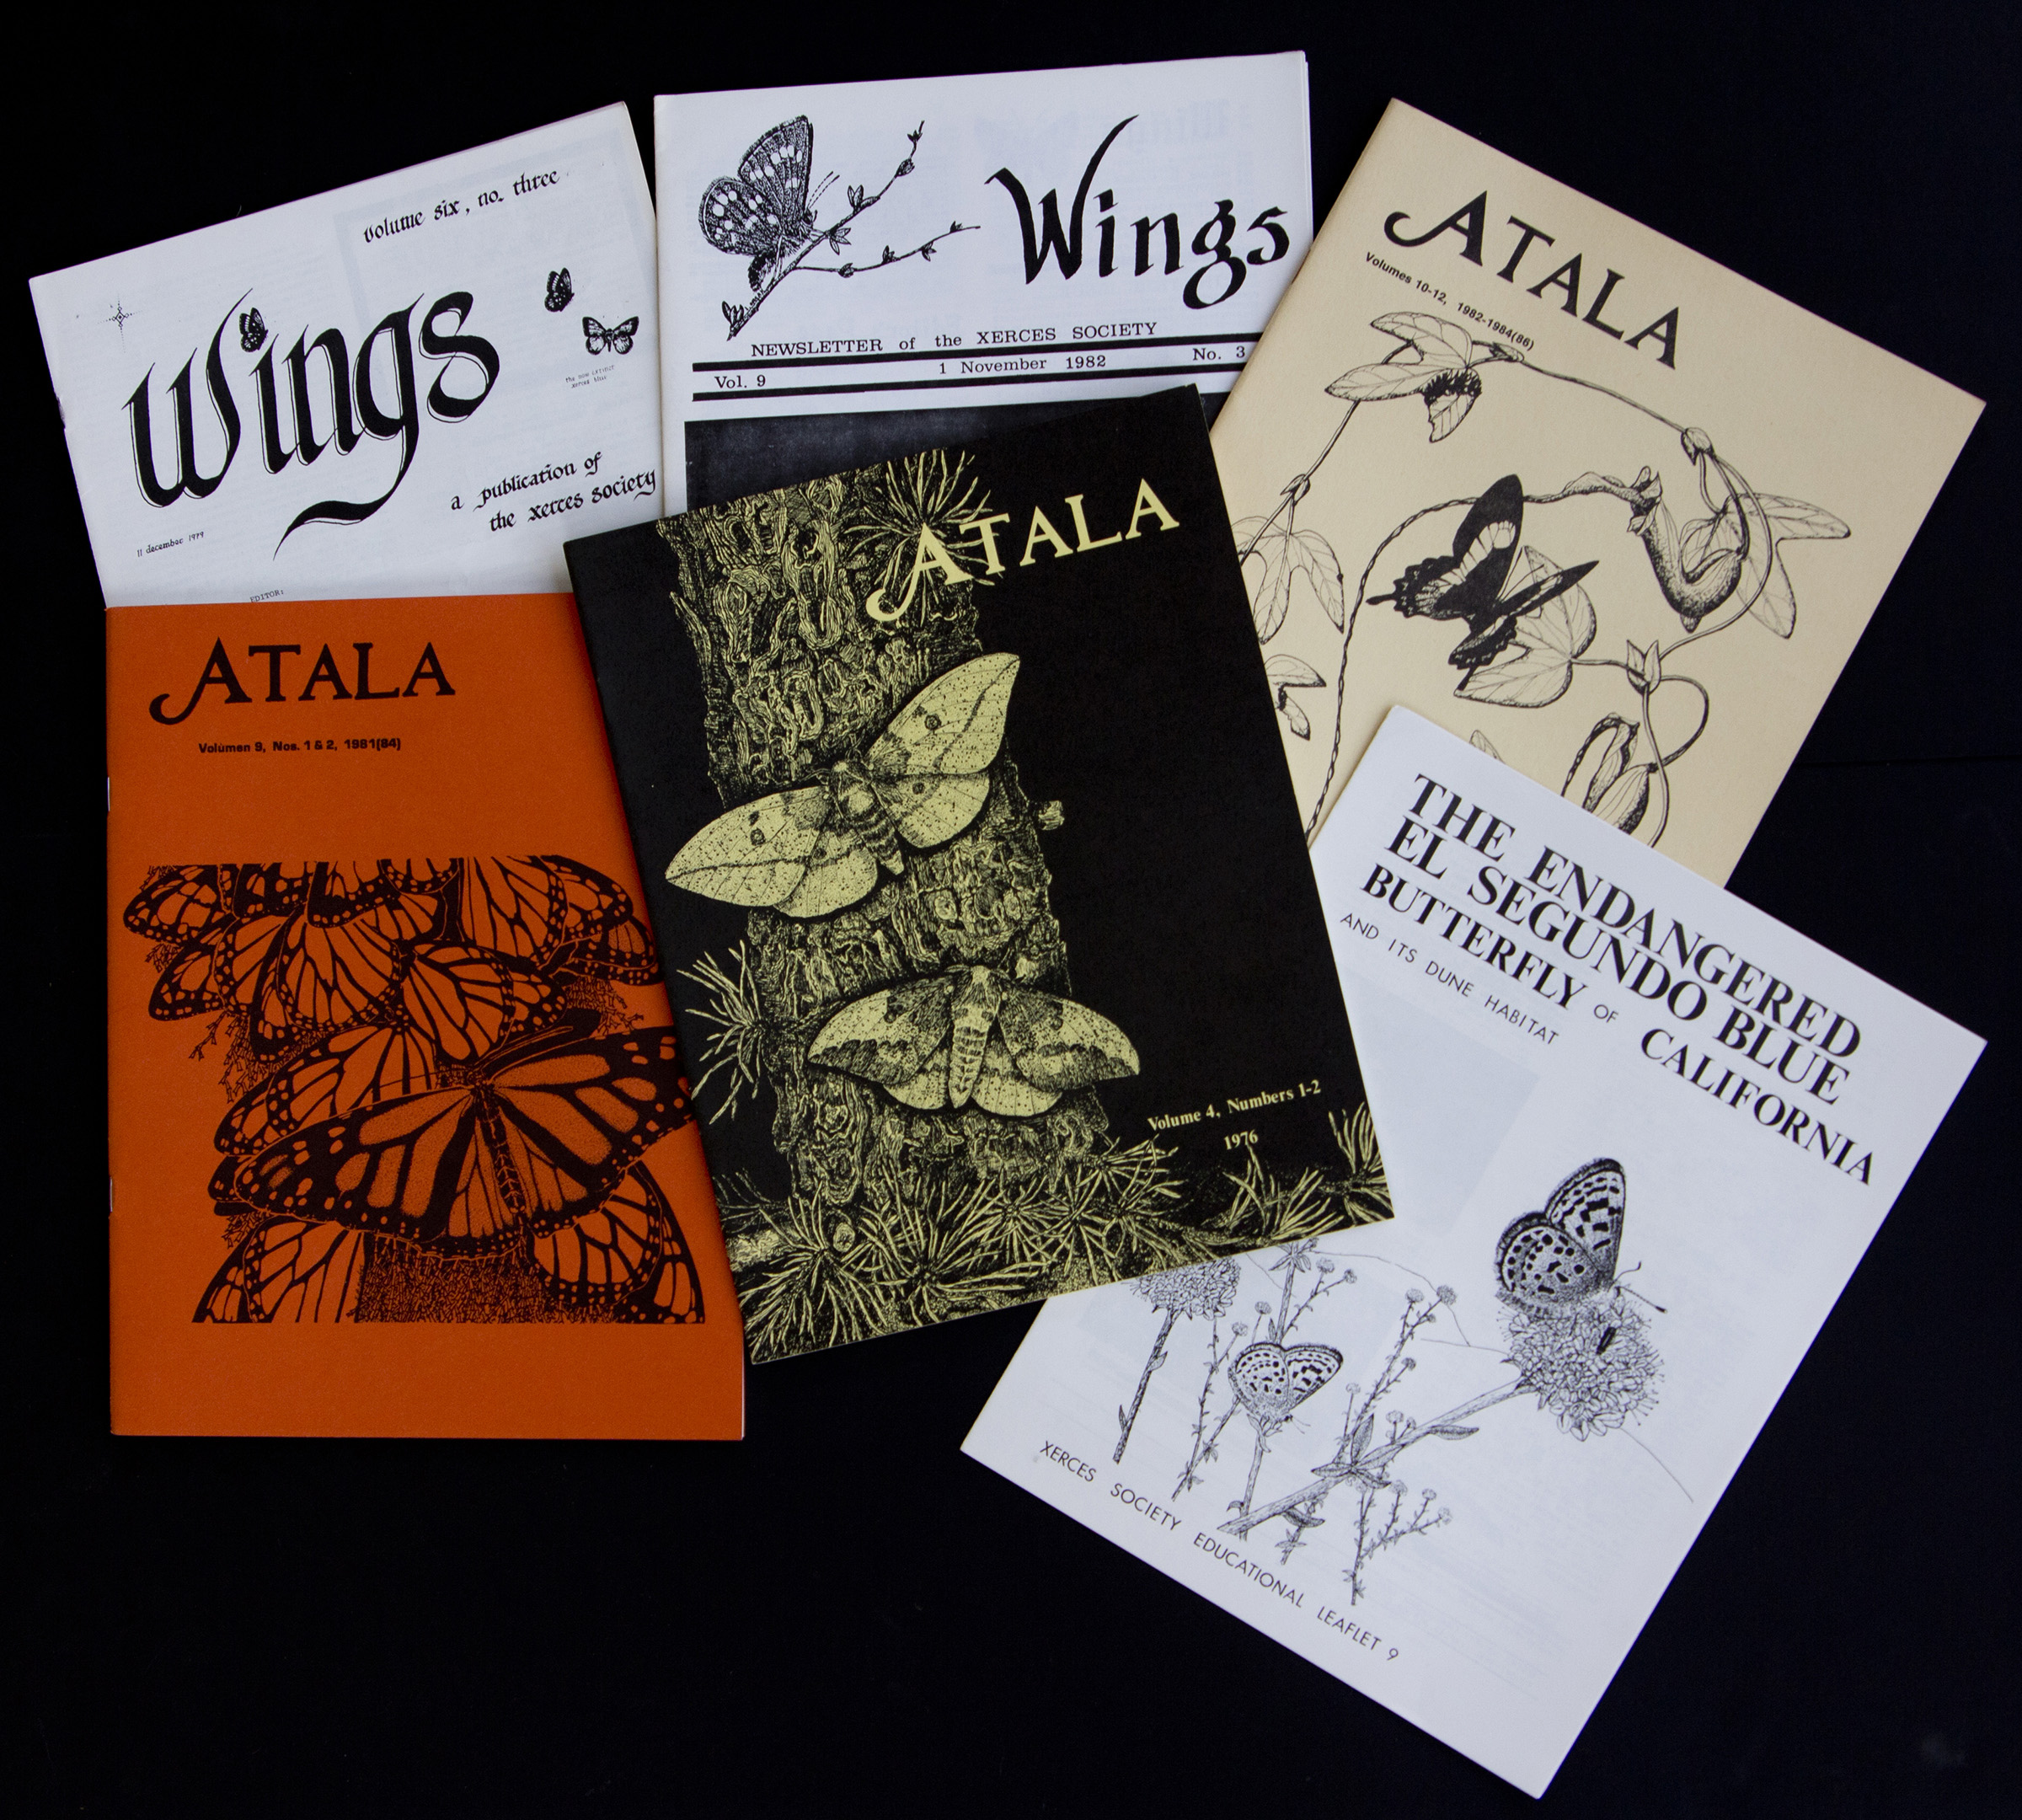 A selection of old publications: Wings newsletter is printed in black-and-white, with the covers of Atala journal are orange, black, and pale yellow.